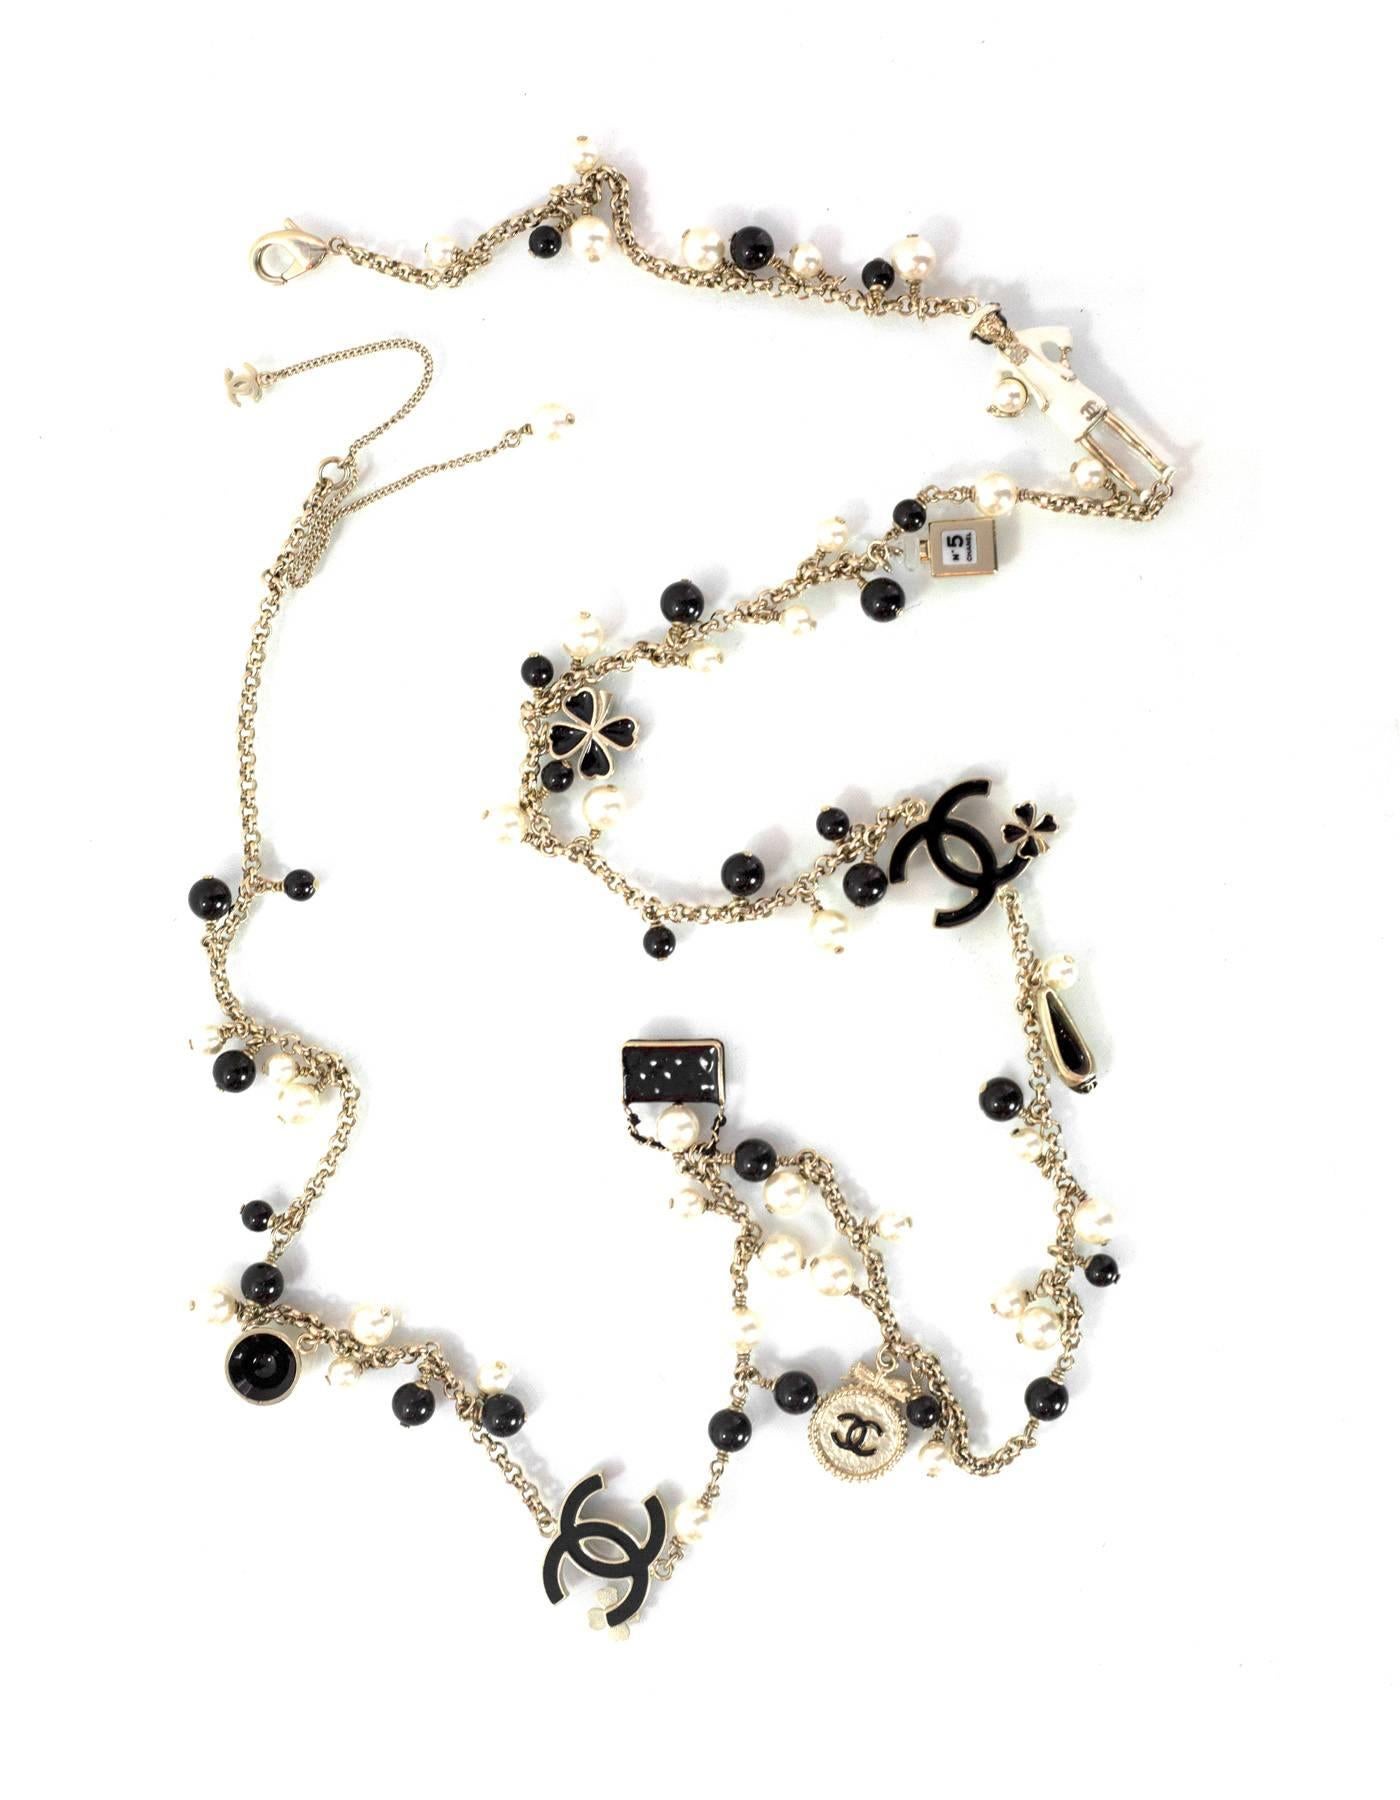 Chanel Pearl Beaded & Iconic Charm Necklace
Features Chanel iconic charms throughout necklace
Made In: Italy
Year of Production: 2012
Color: Light gold, black, and ivory
Materials: Faux pearl, beads, metal and enamel
Closure: Lobster claw